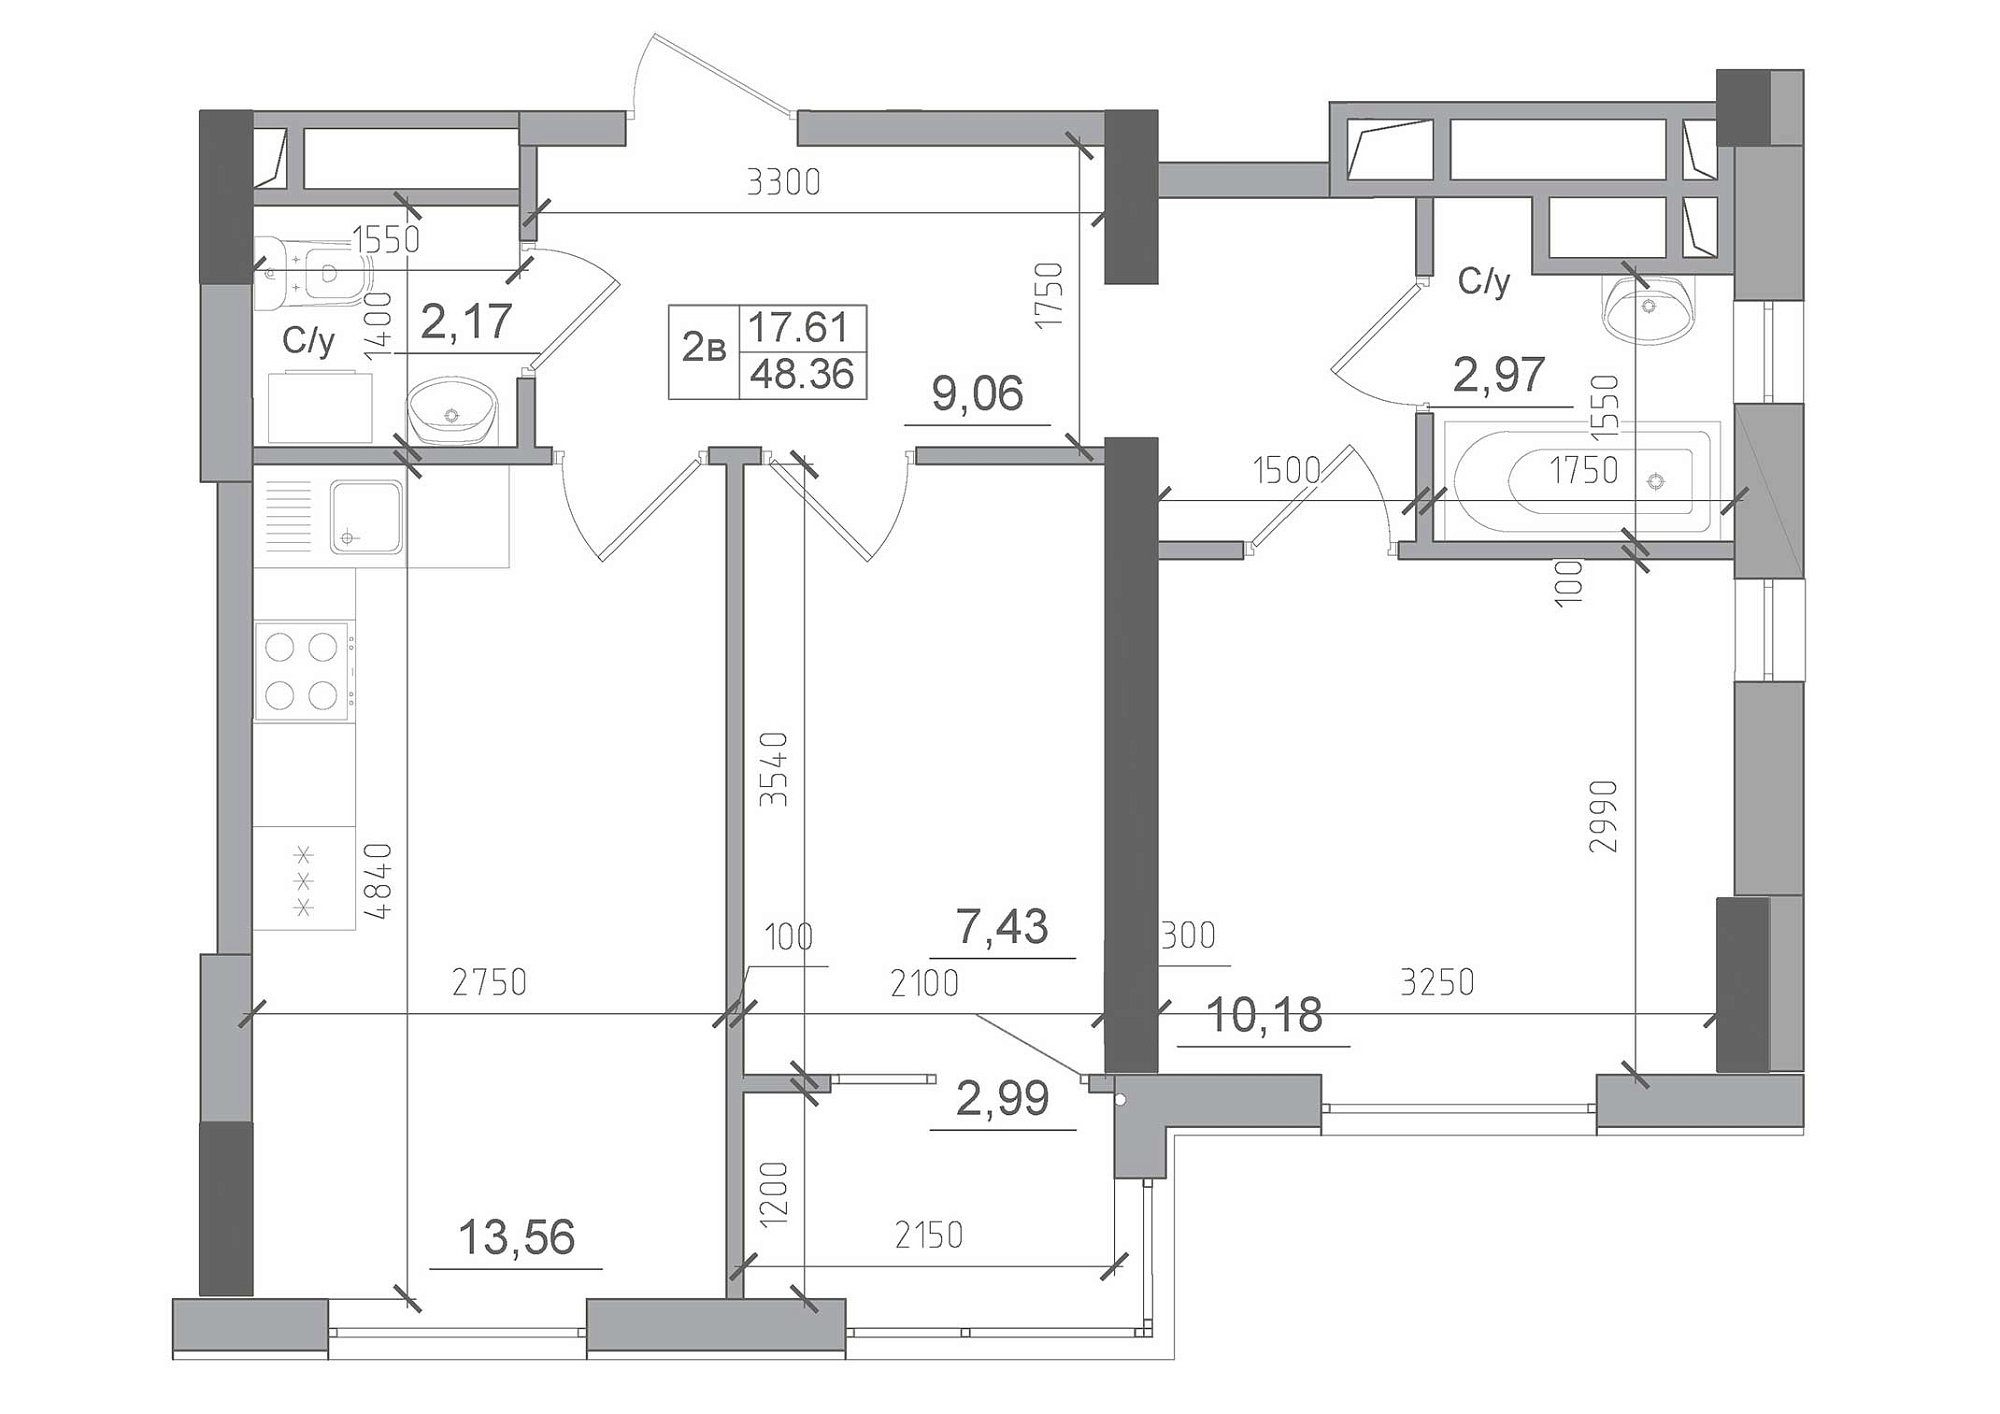 Planning 2-rm flats area 48.36m2, AB-22-11/00010.